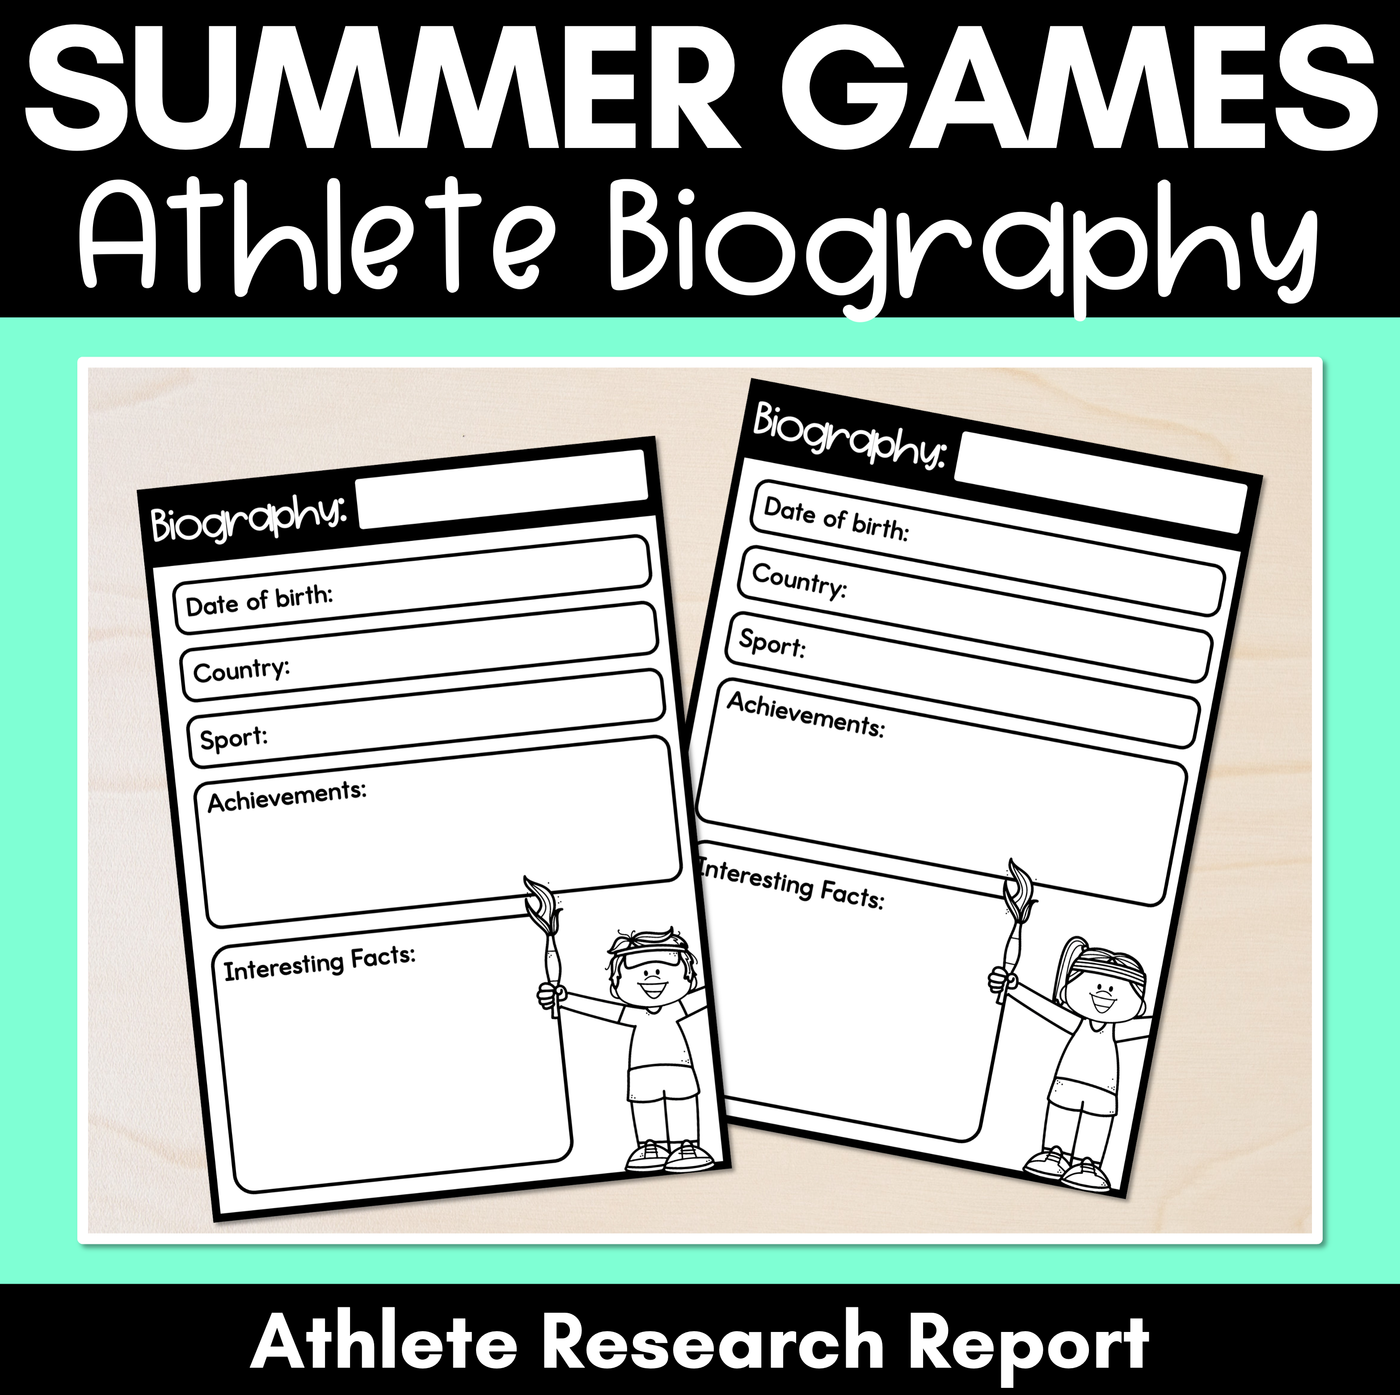 Summer Games Research Report - Athlete Biography - Summer Games Writing Templates